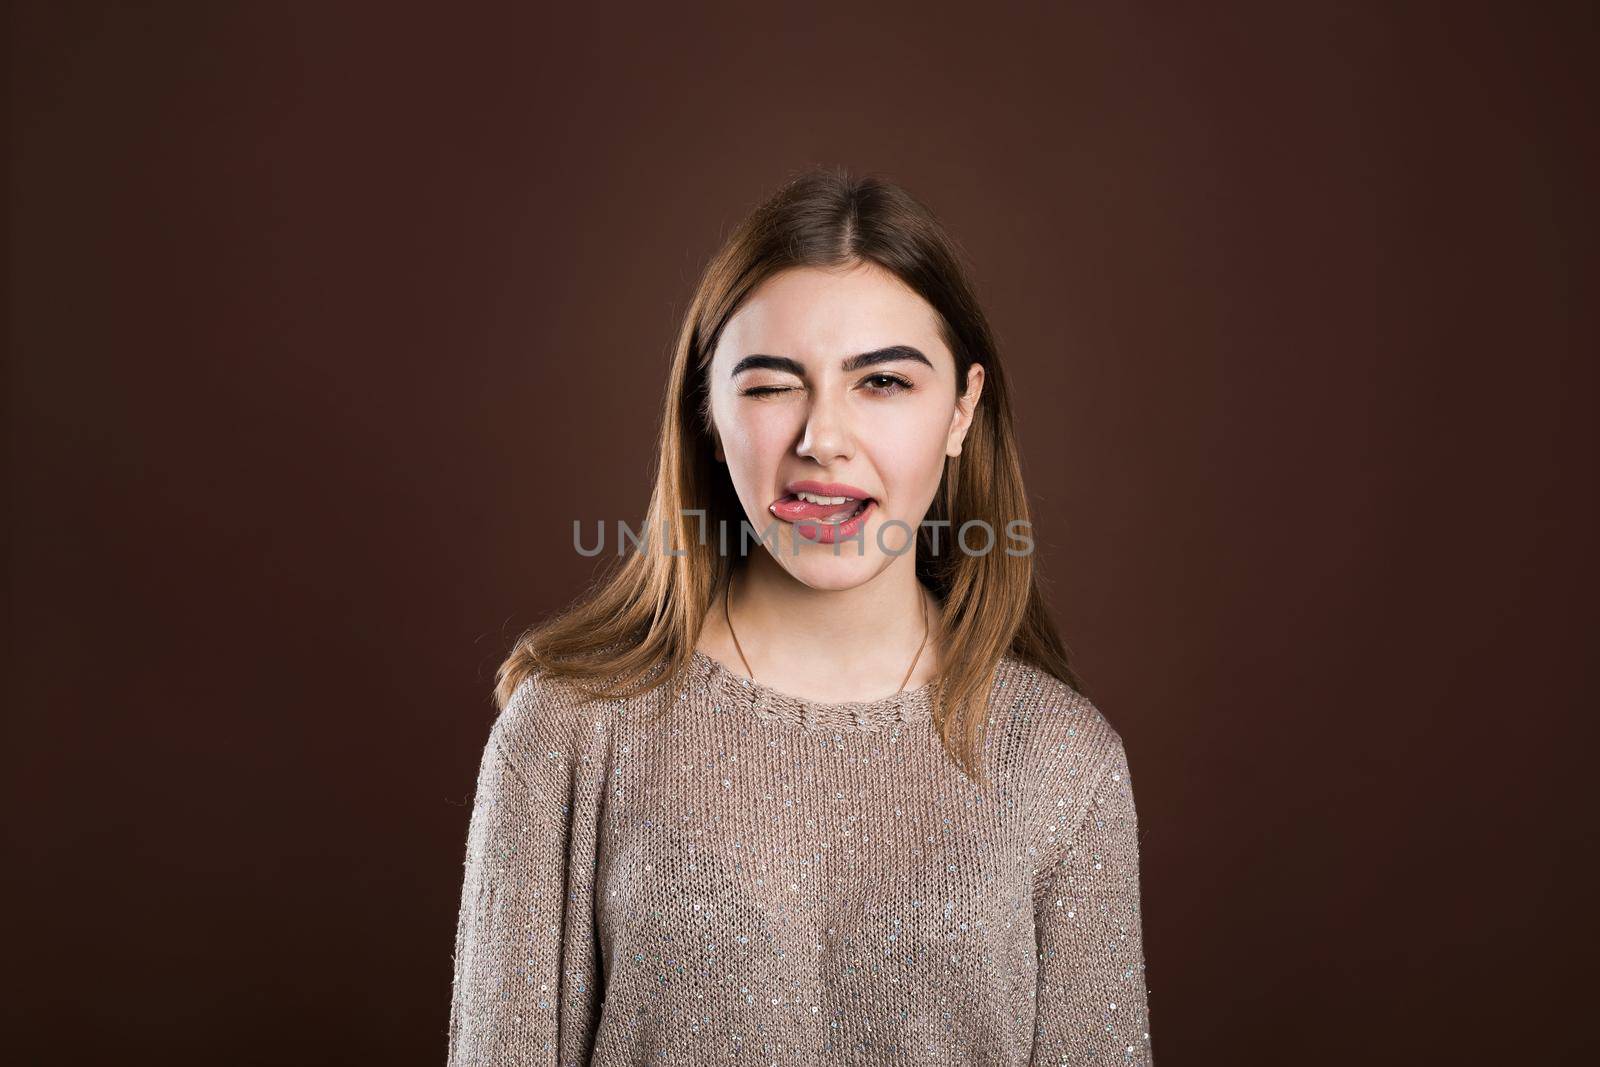 Cheerful young beautiful girl smiling showing tongue looking at camera over brown background. by StudioPeace